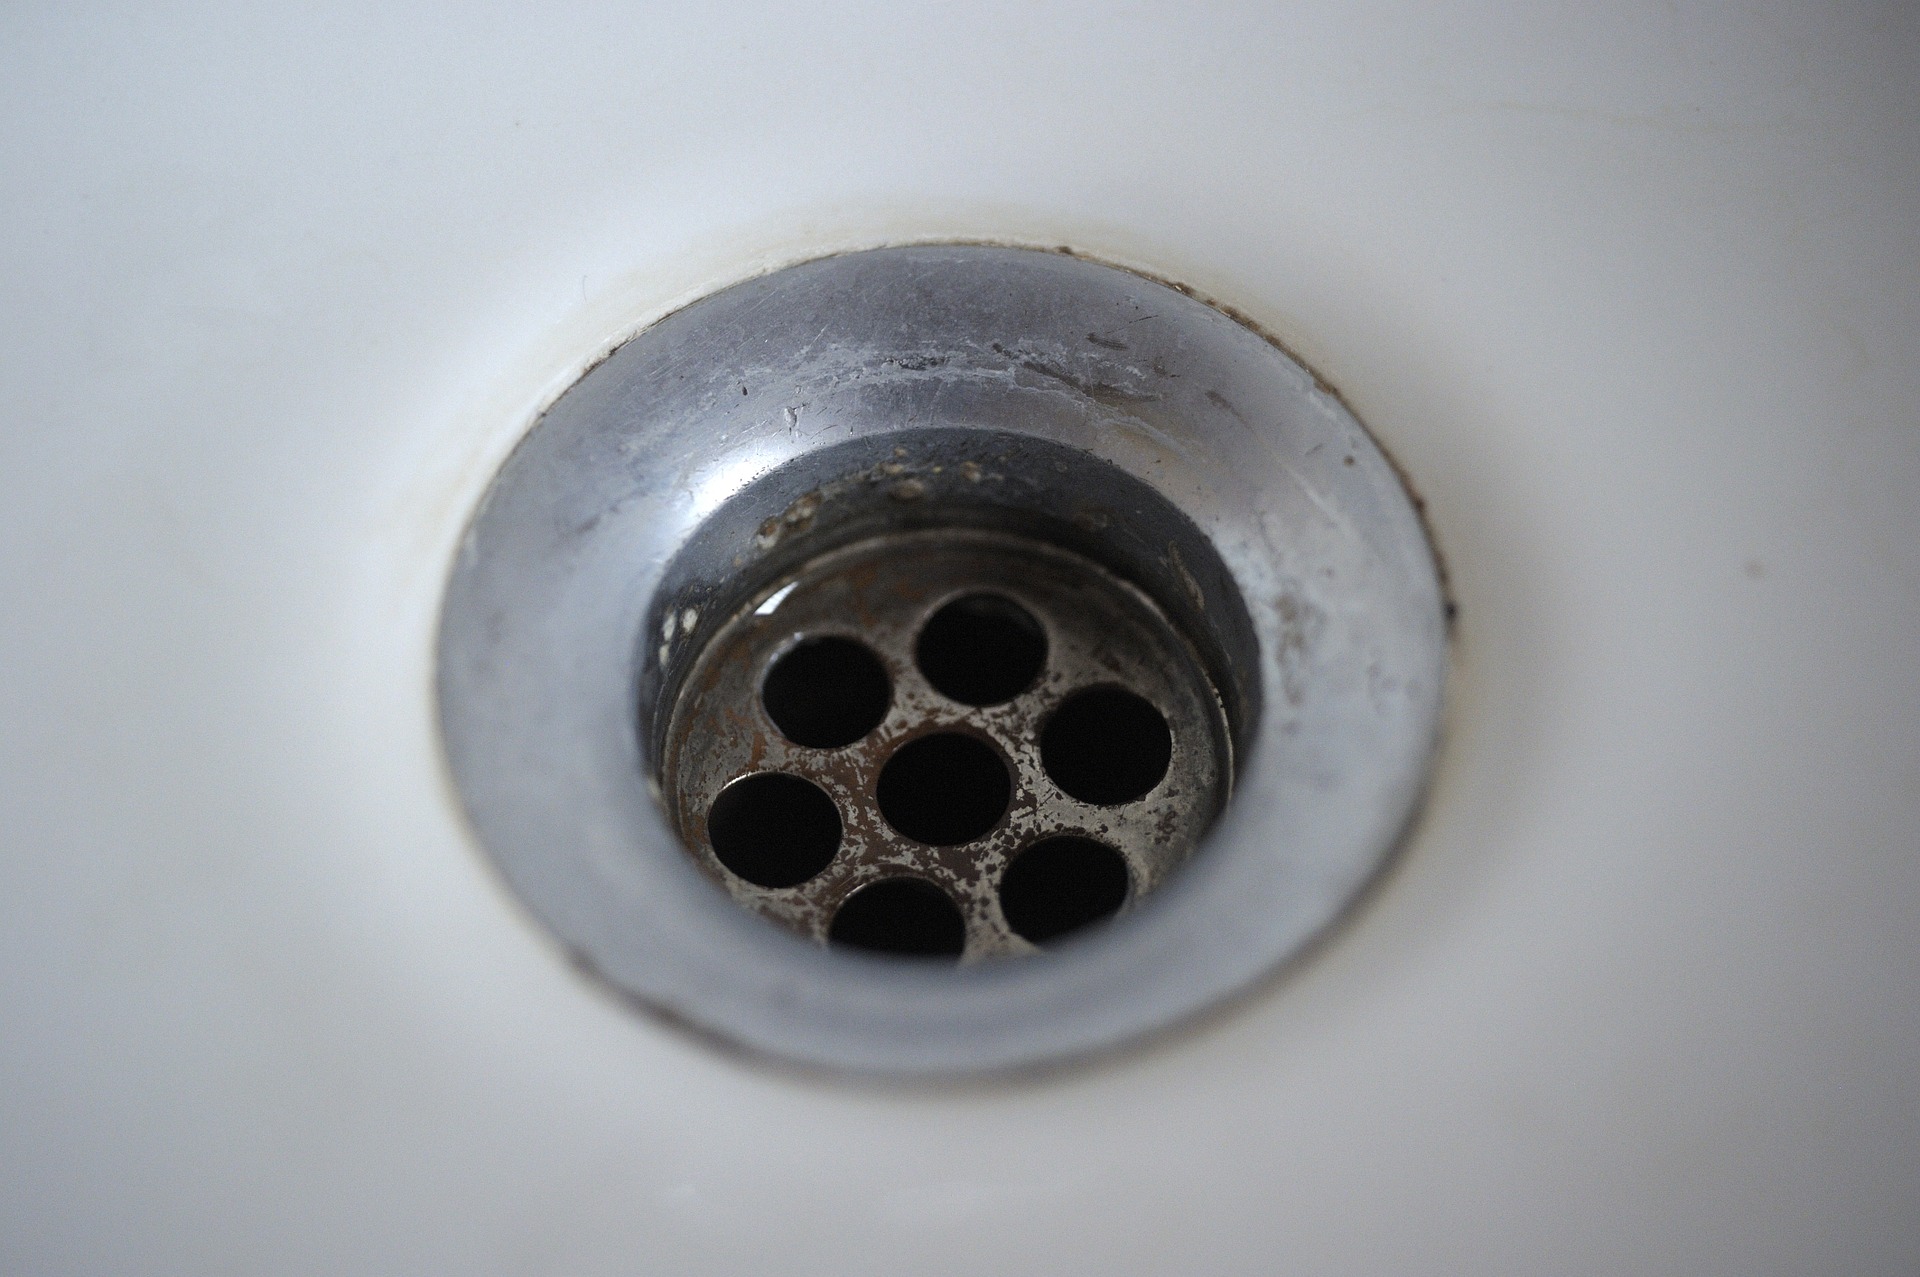 How High Should The Drain Pipe Be For A Washing Machine?